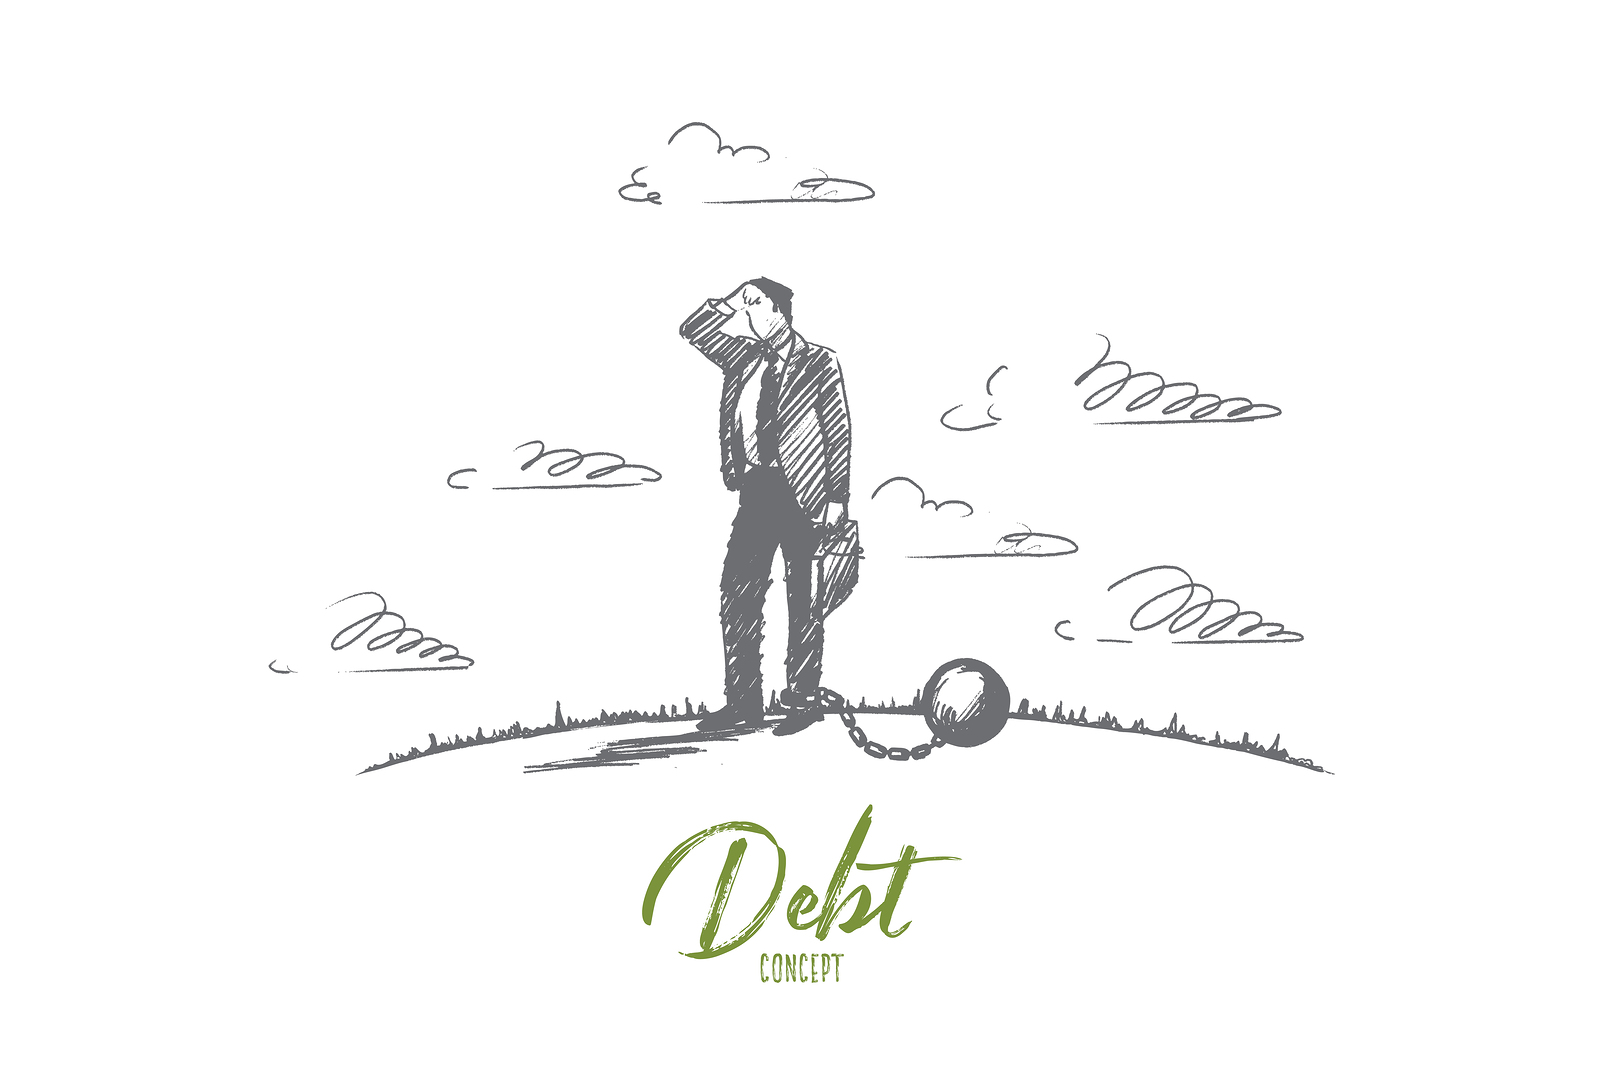 Debt concept drawing | You've Made Your Money - Now What? | Brighter Vision Web Solutions | Therapist Websites & Marketing for Therapists